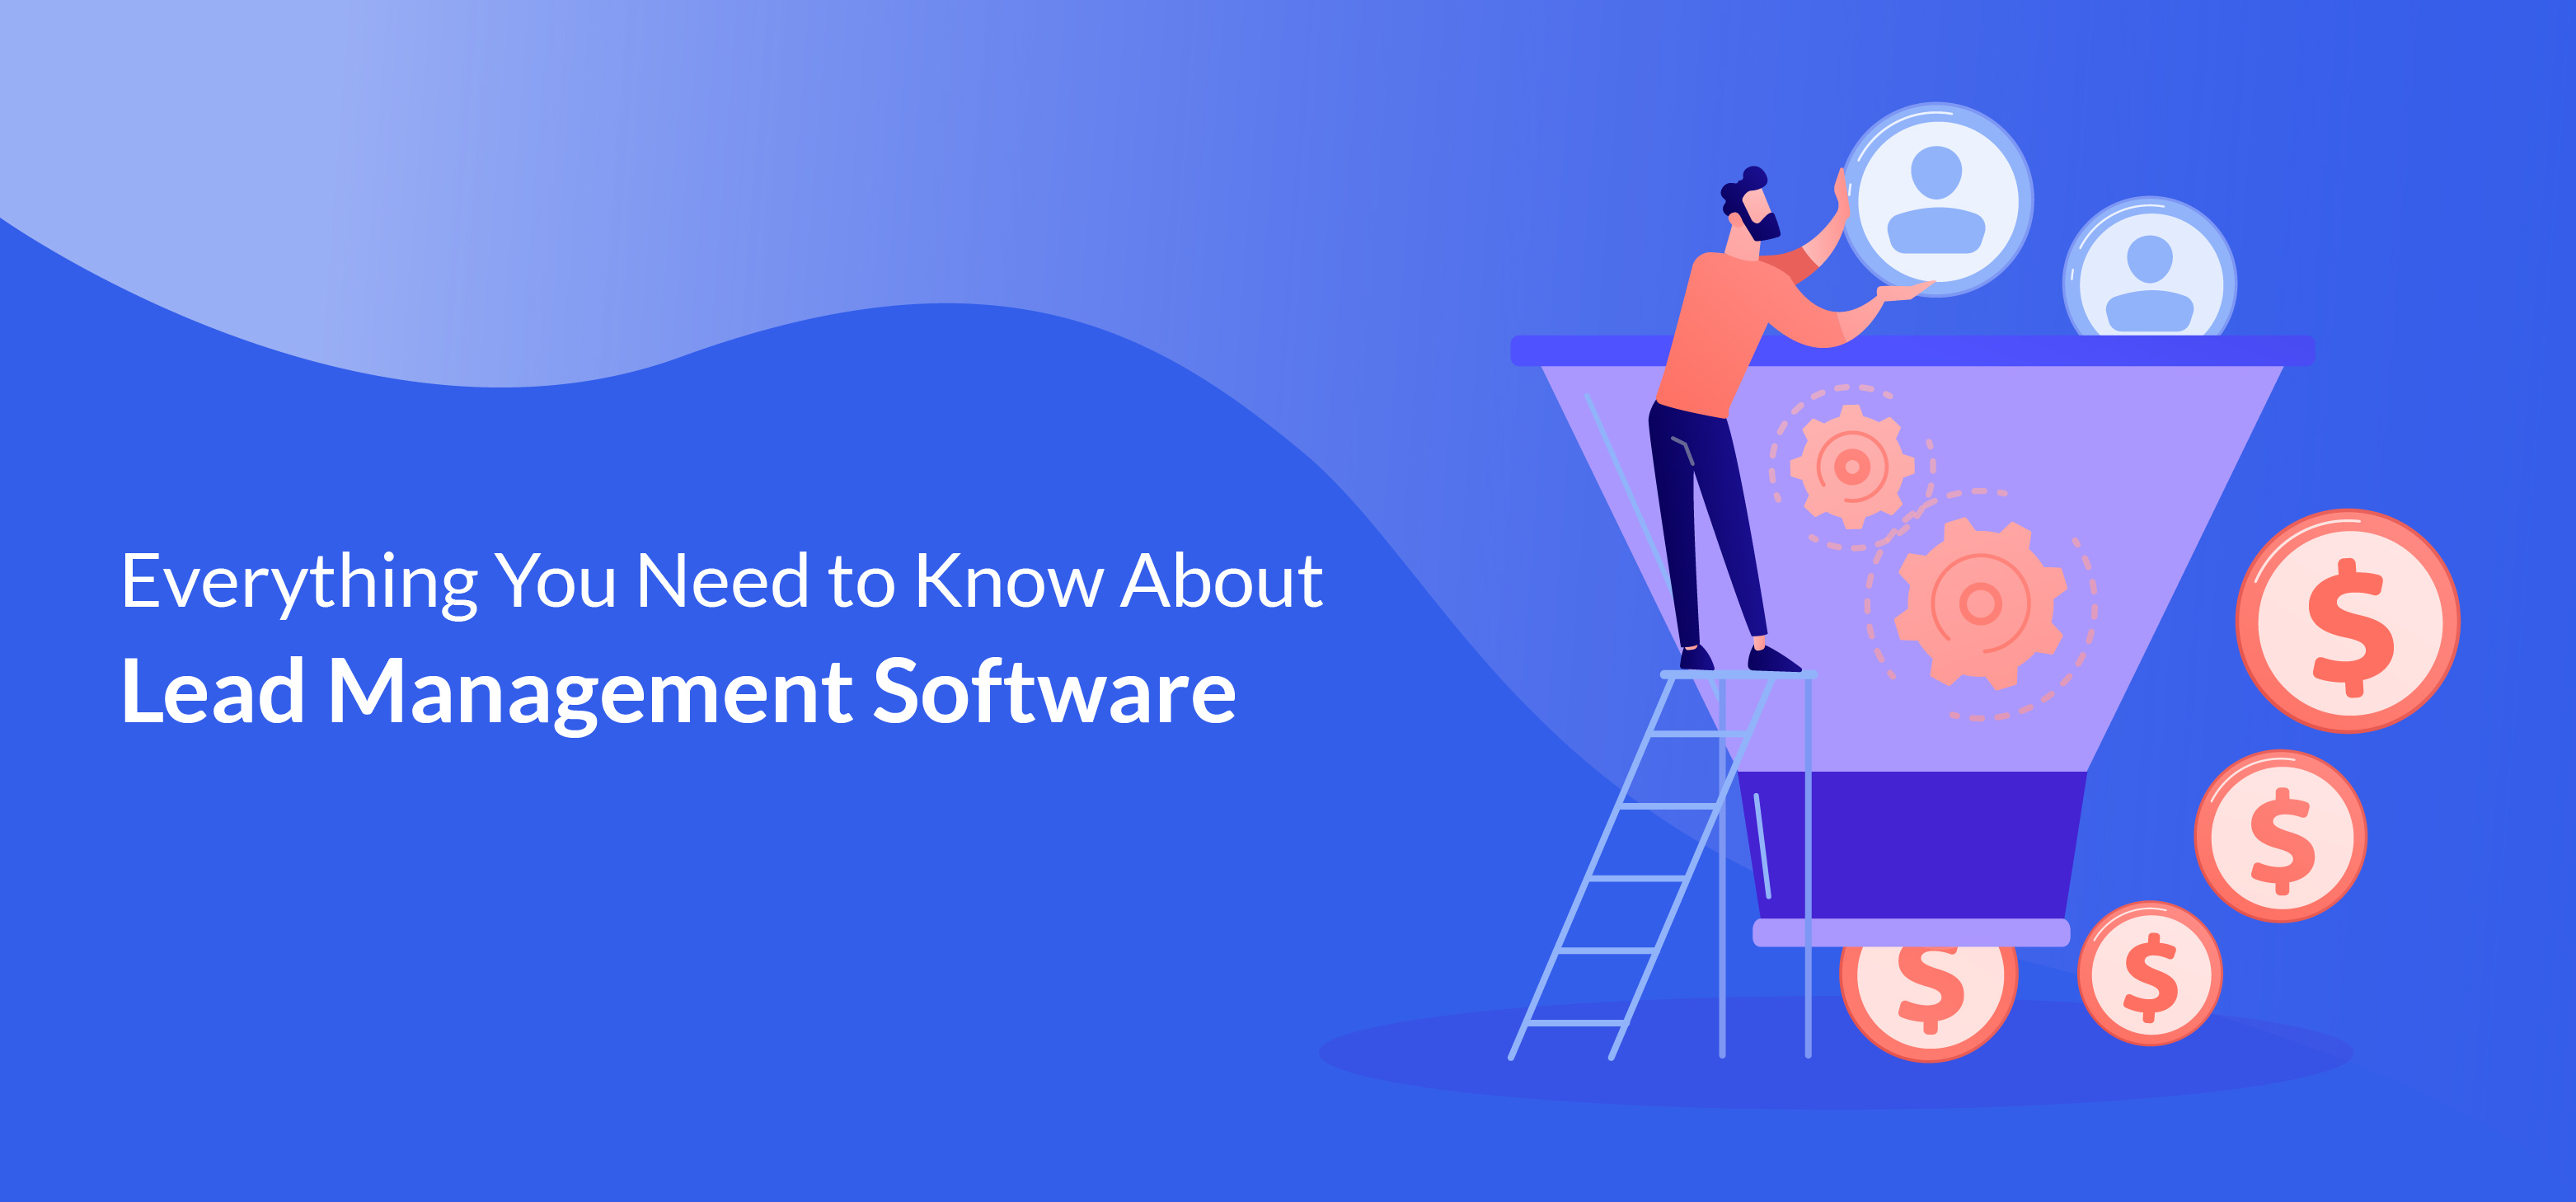 Everything You Need to Know About Lead Management Software